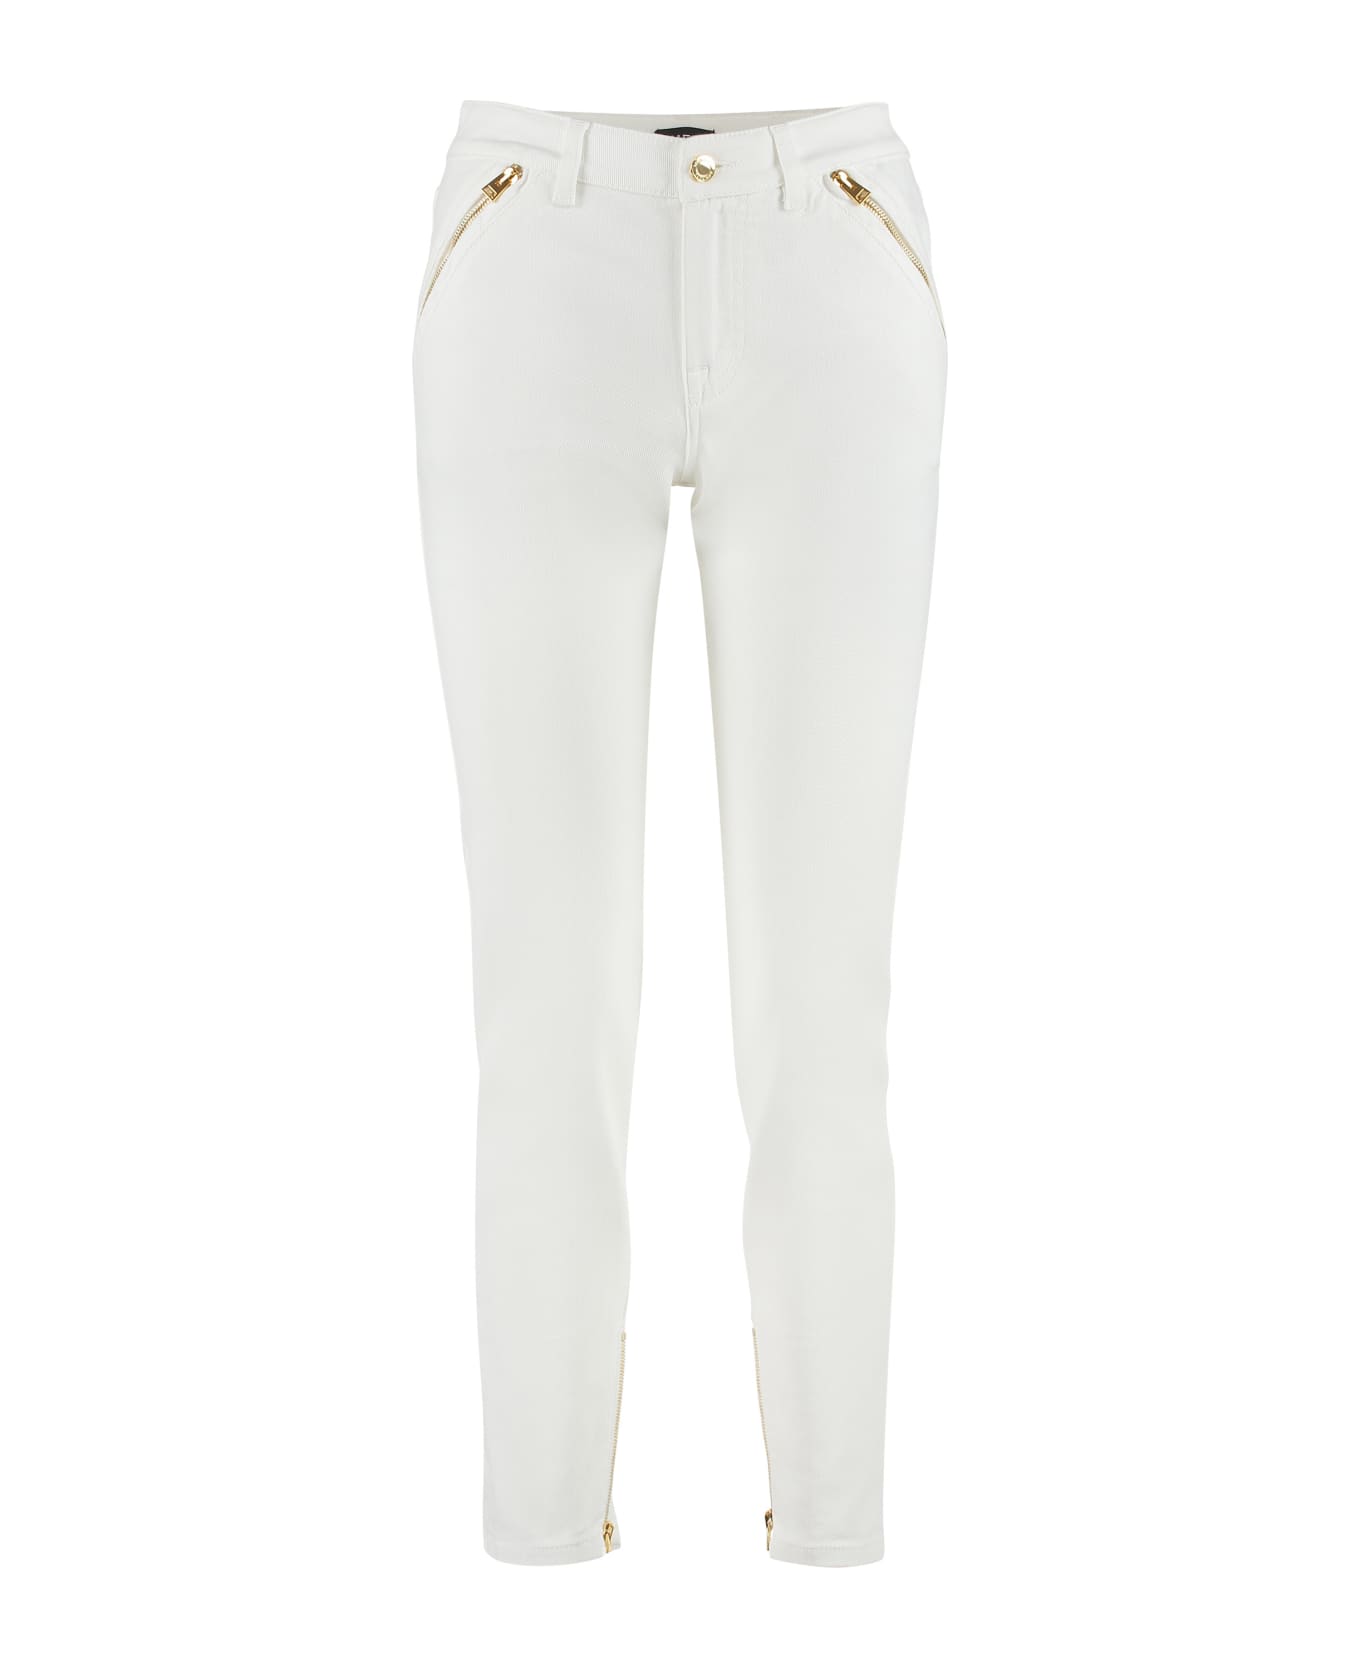 Tom Ford High-rise Skinny-fit Jeans - White デニム